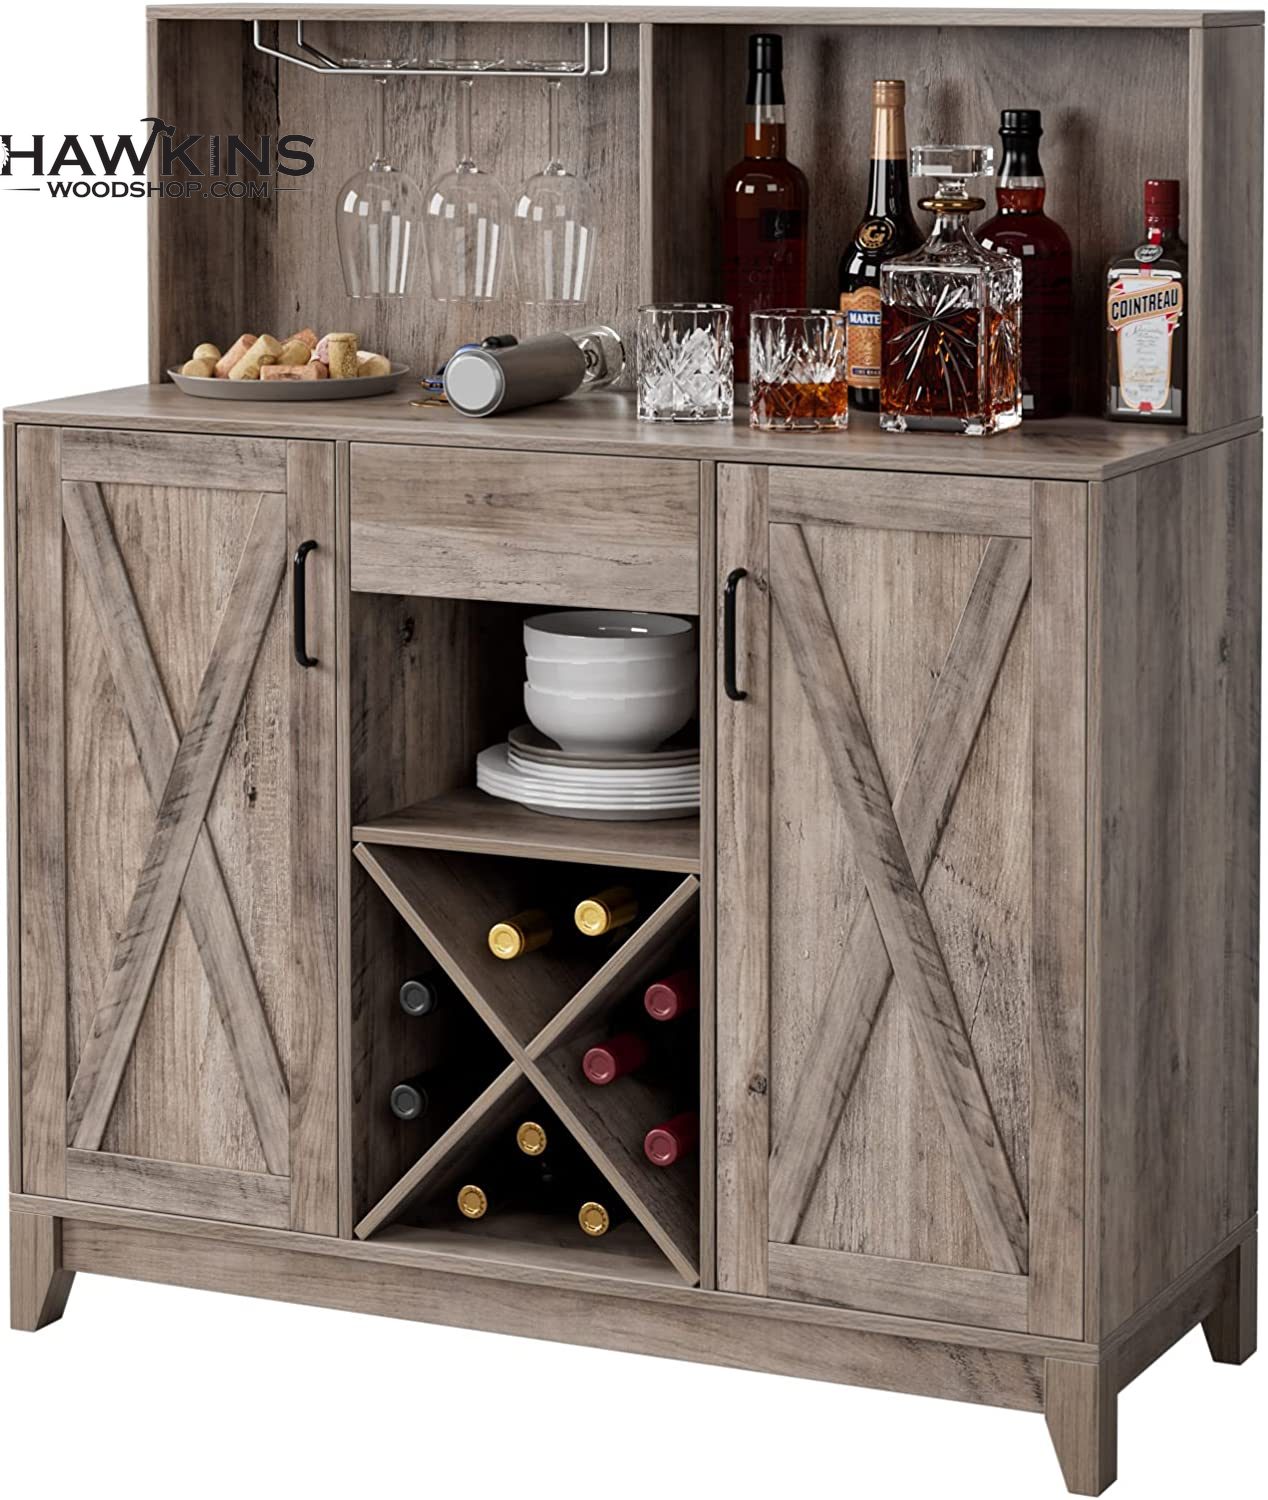 Wine Bar Cabinet For Liquor And Gl Barn Doors With Adjule Storage Shelves Wooden Sideboard Buffet Kitchen Dining Room Farmhouse Ash Grey Built To Order Made